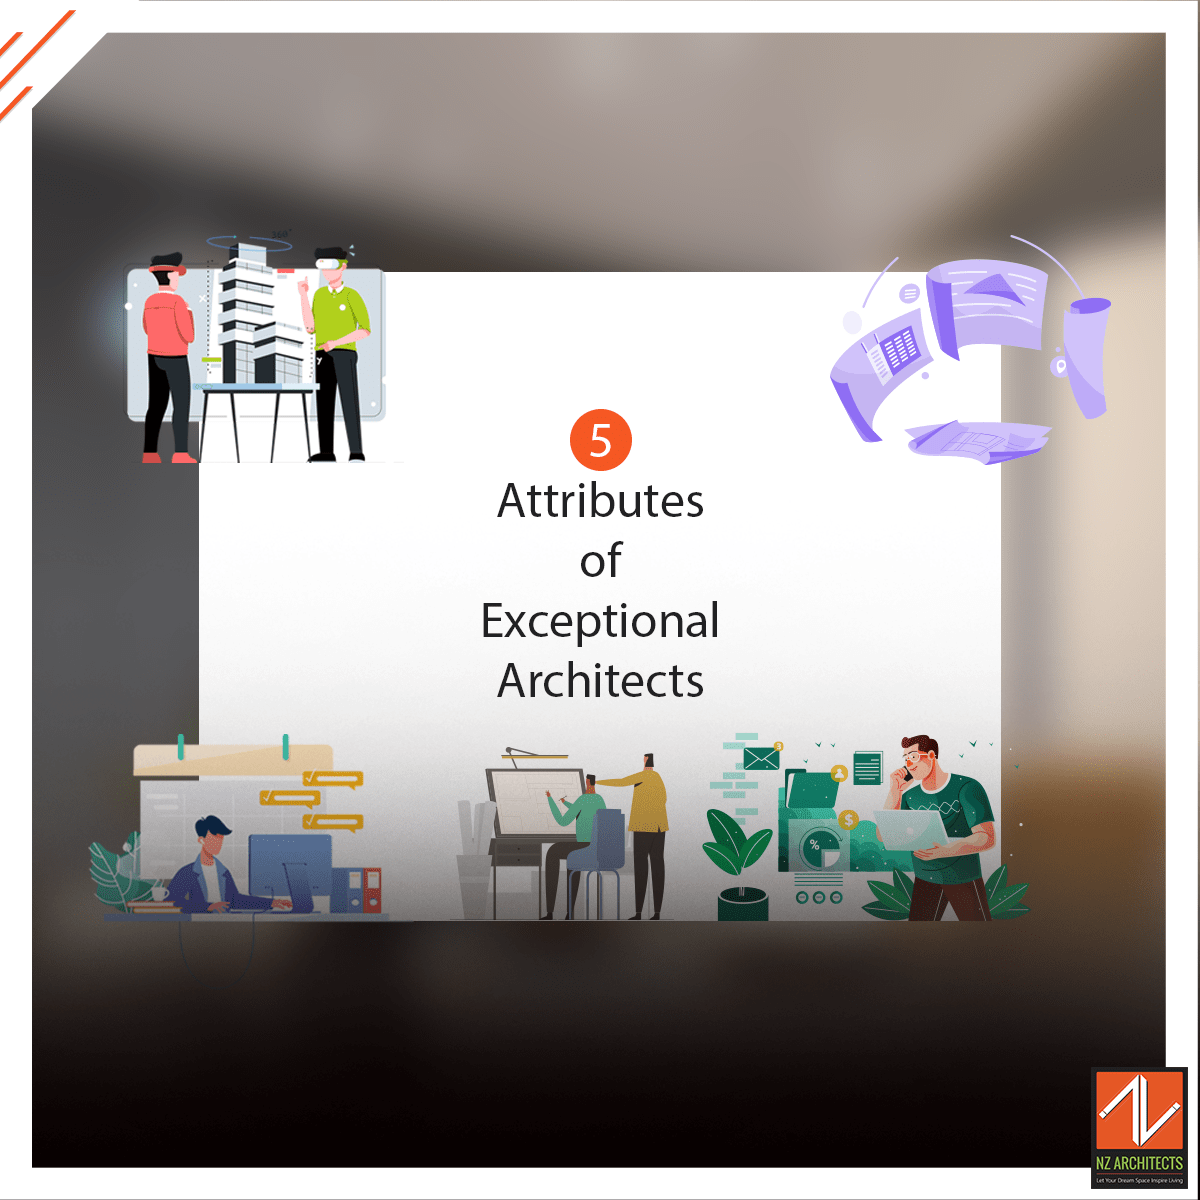 5 must-have attributes of Exceptional Architects